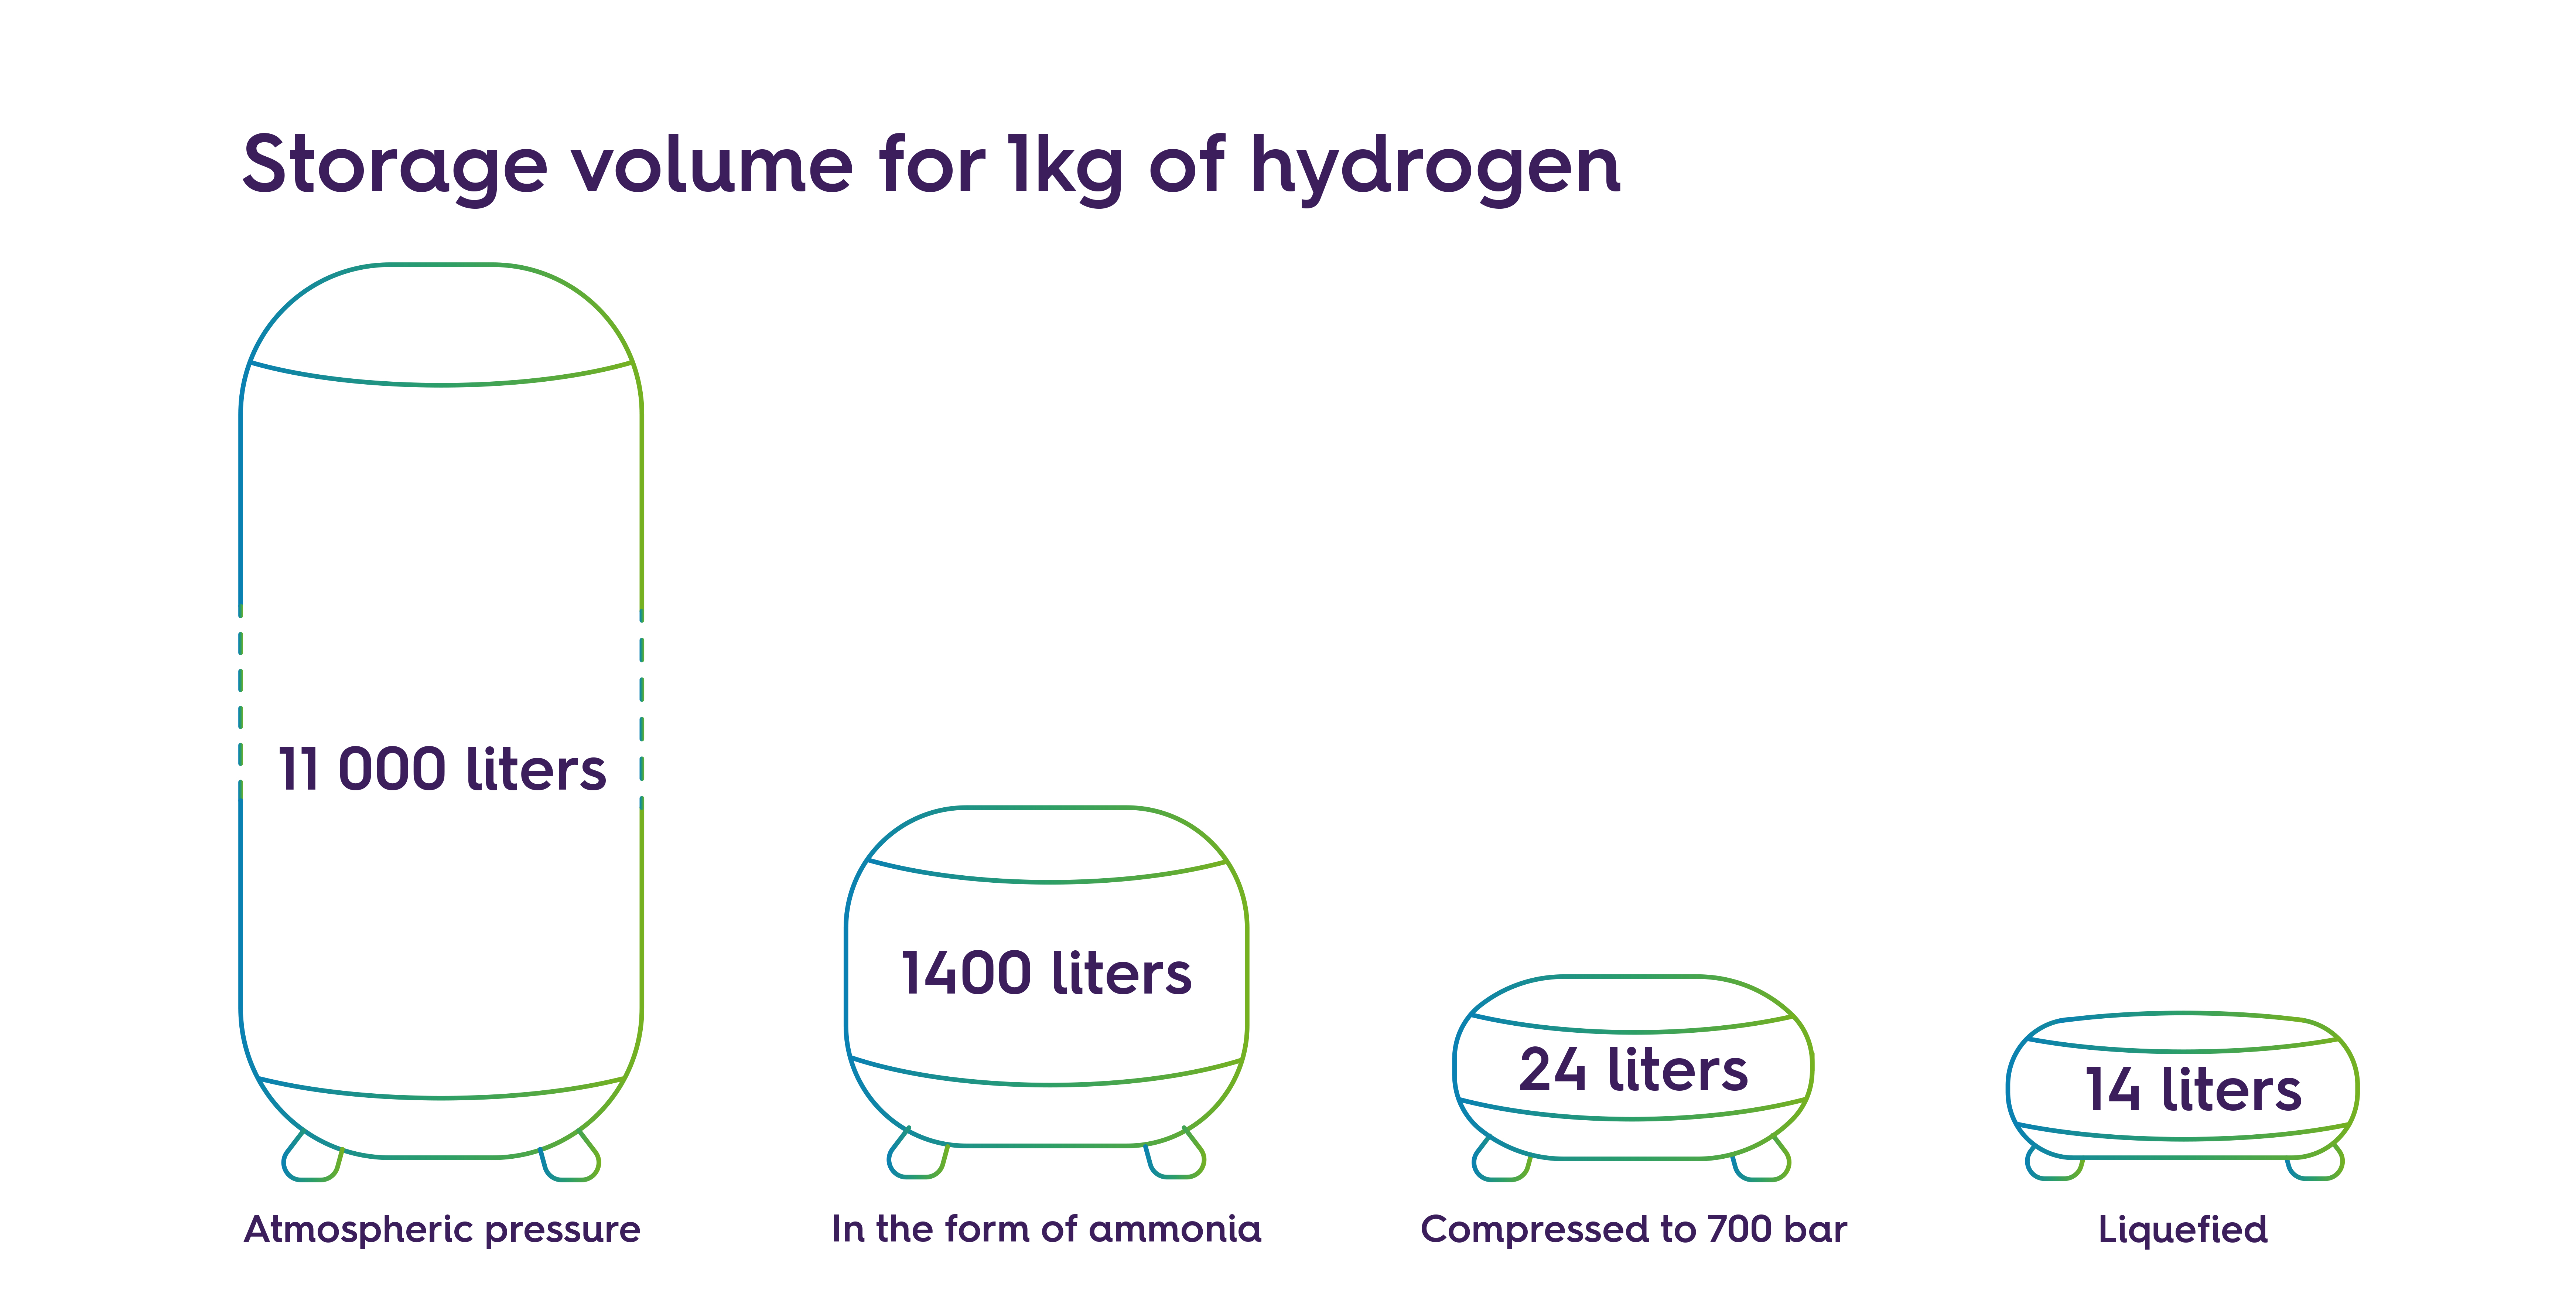 Comparison between the volume of non-compressed hydrogen, hydrogen compressed to 700 bar and liquefied